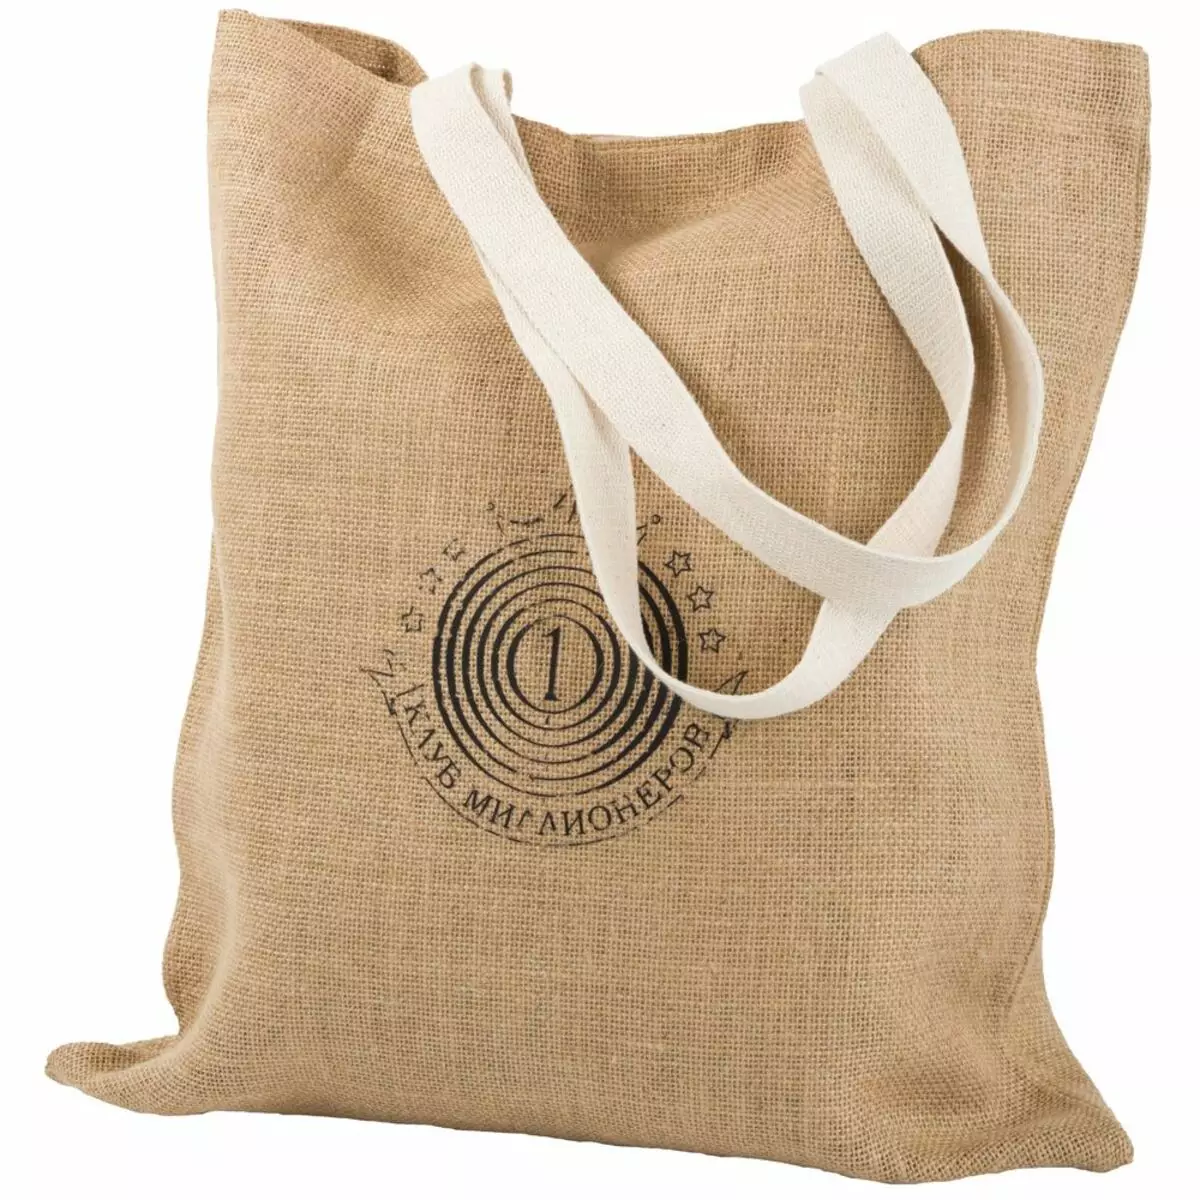 Fabric bags (89 photos): Women's fabric eco-models, master class on tailoring, how to make a bag of burlap and flax 2777_52